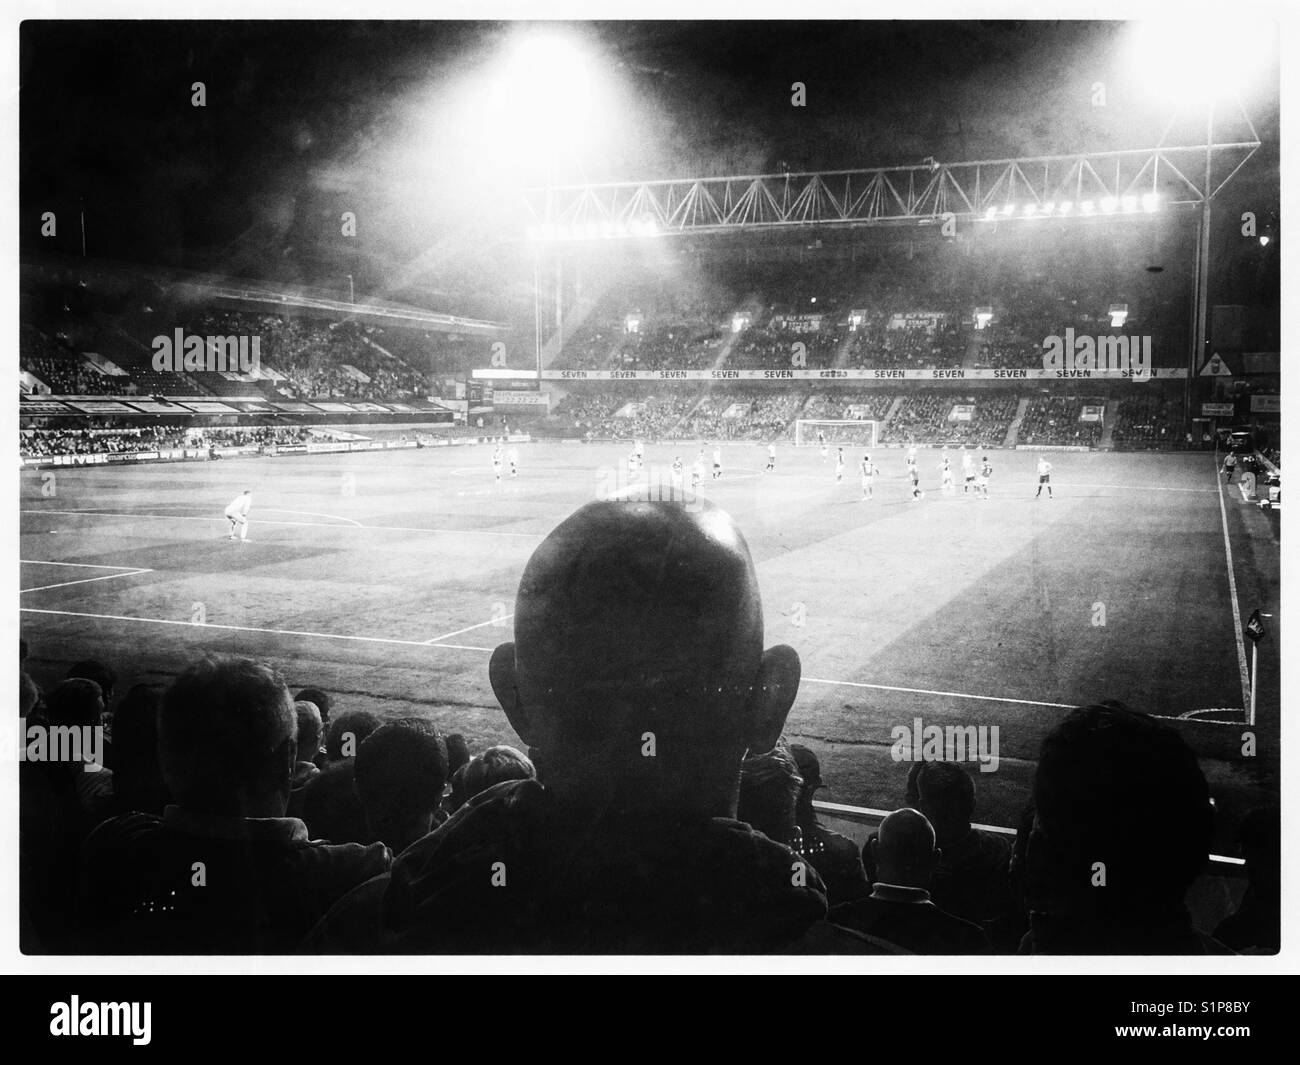 Bald man watching a soccer game. Stock Photo